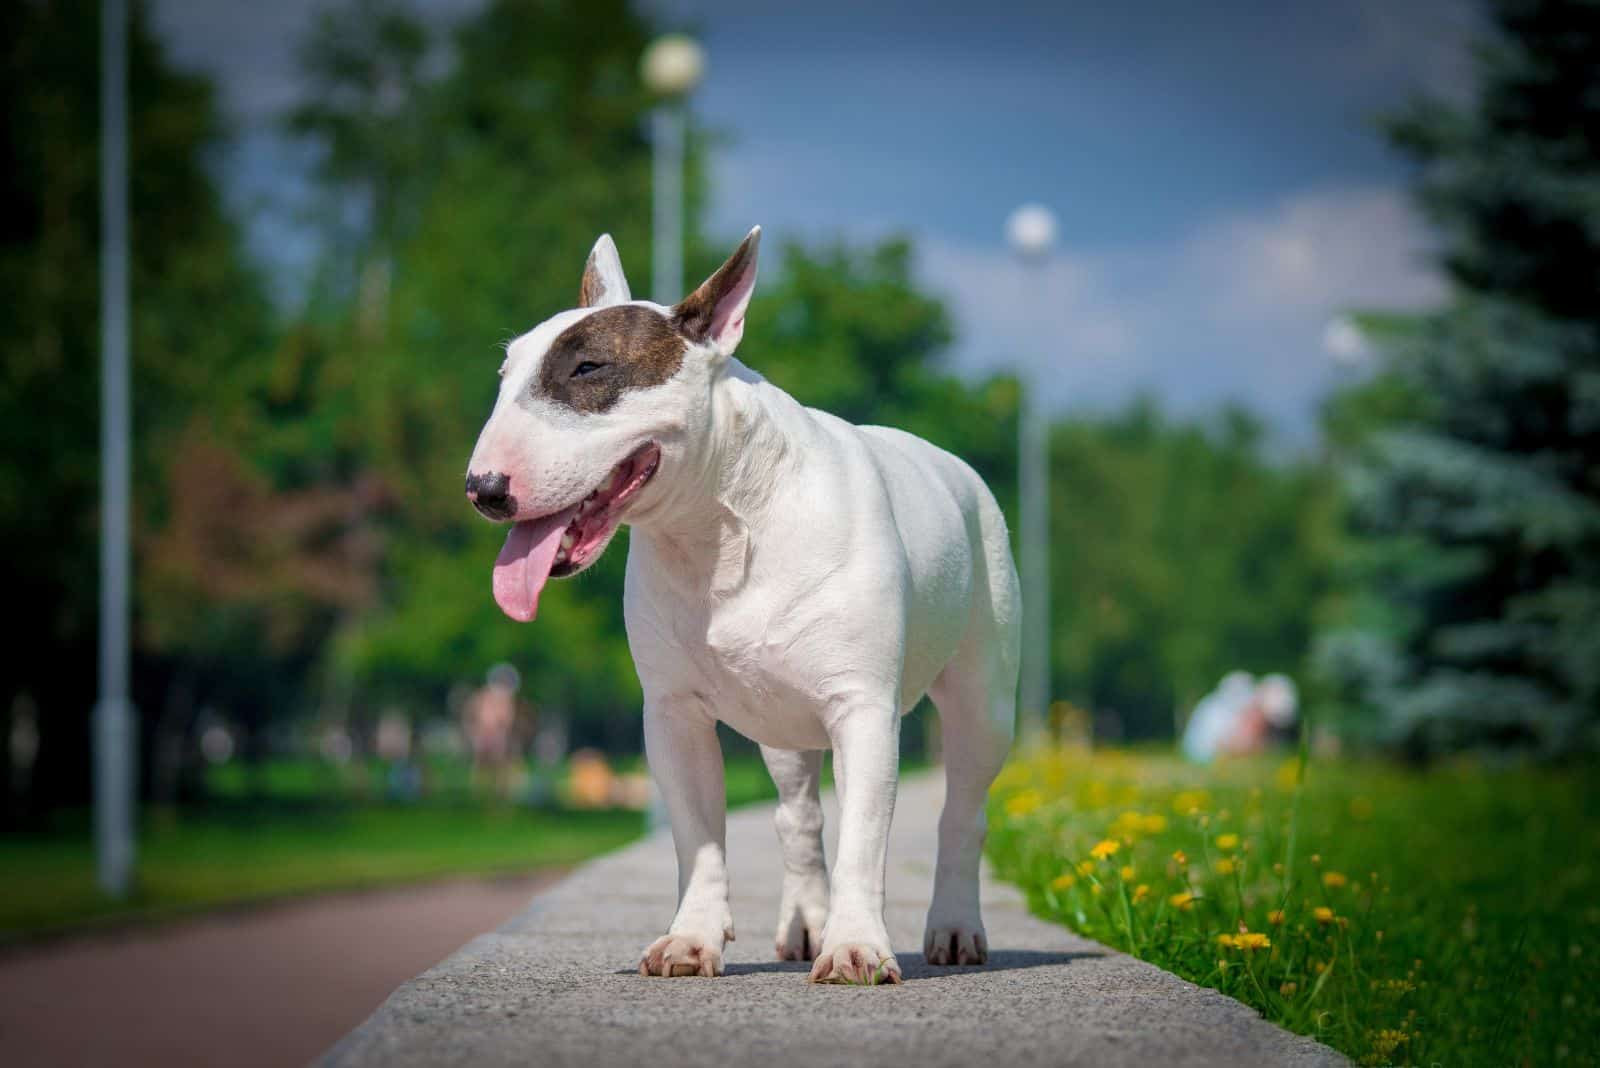 Bull Terrier standing on the pavement